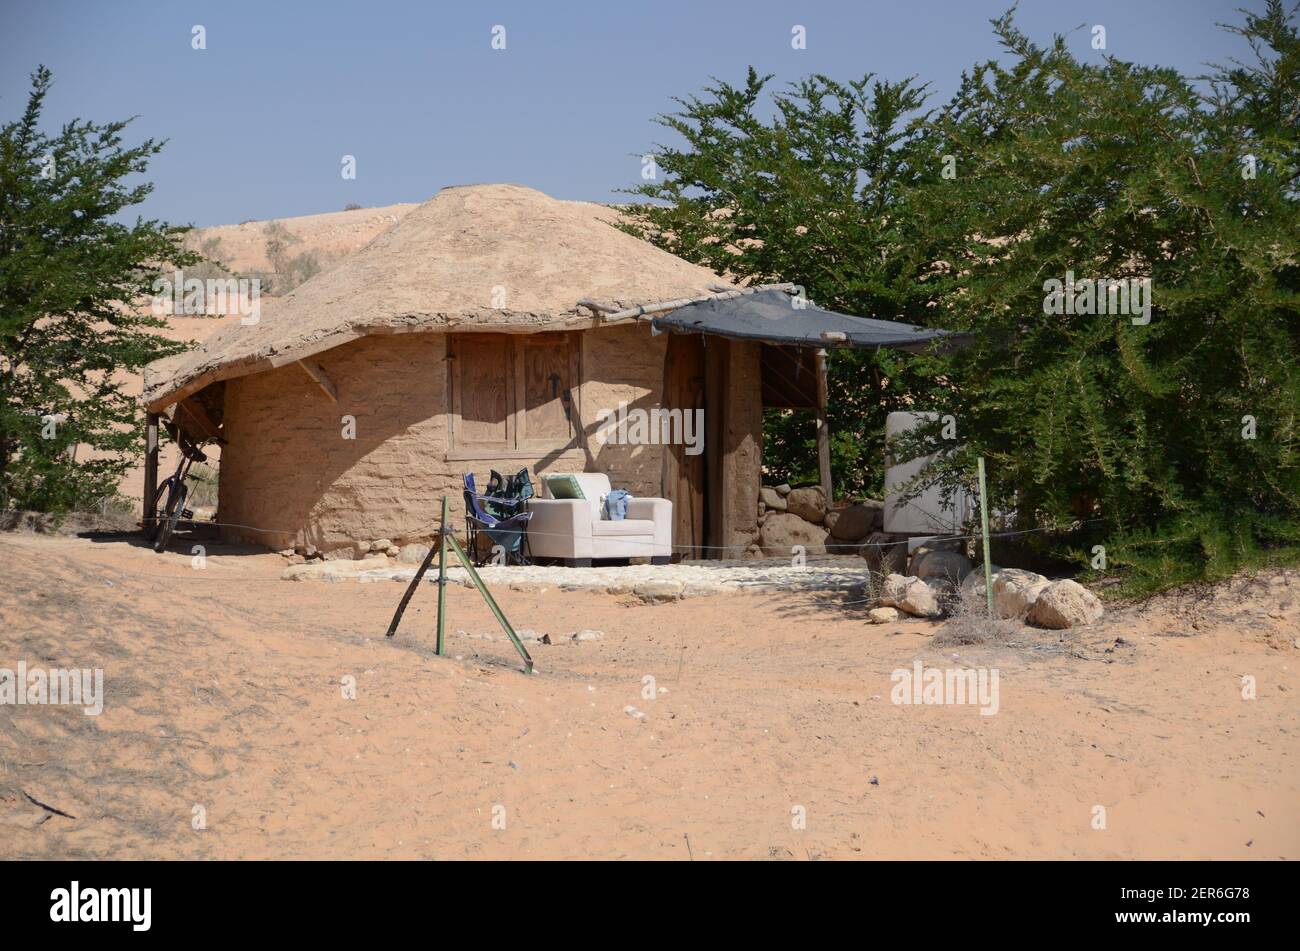 Hobbit style homes for tourists in the Negev, Israel Stock Photo